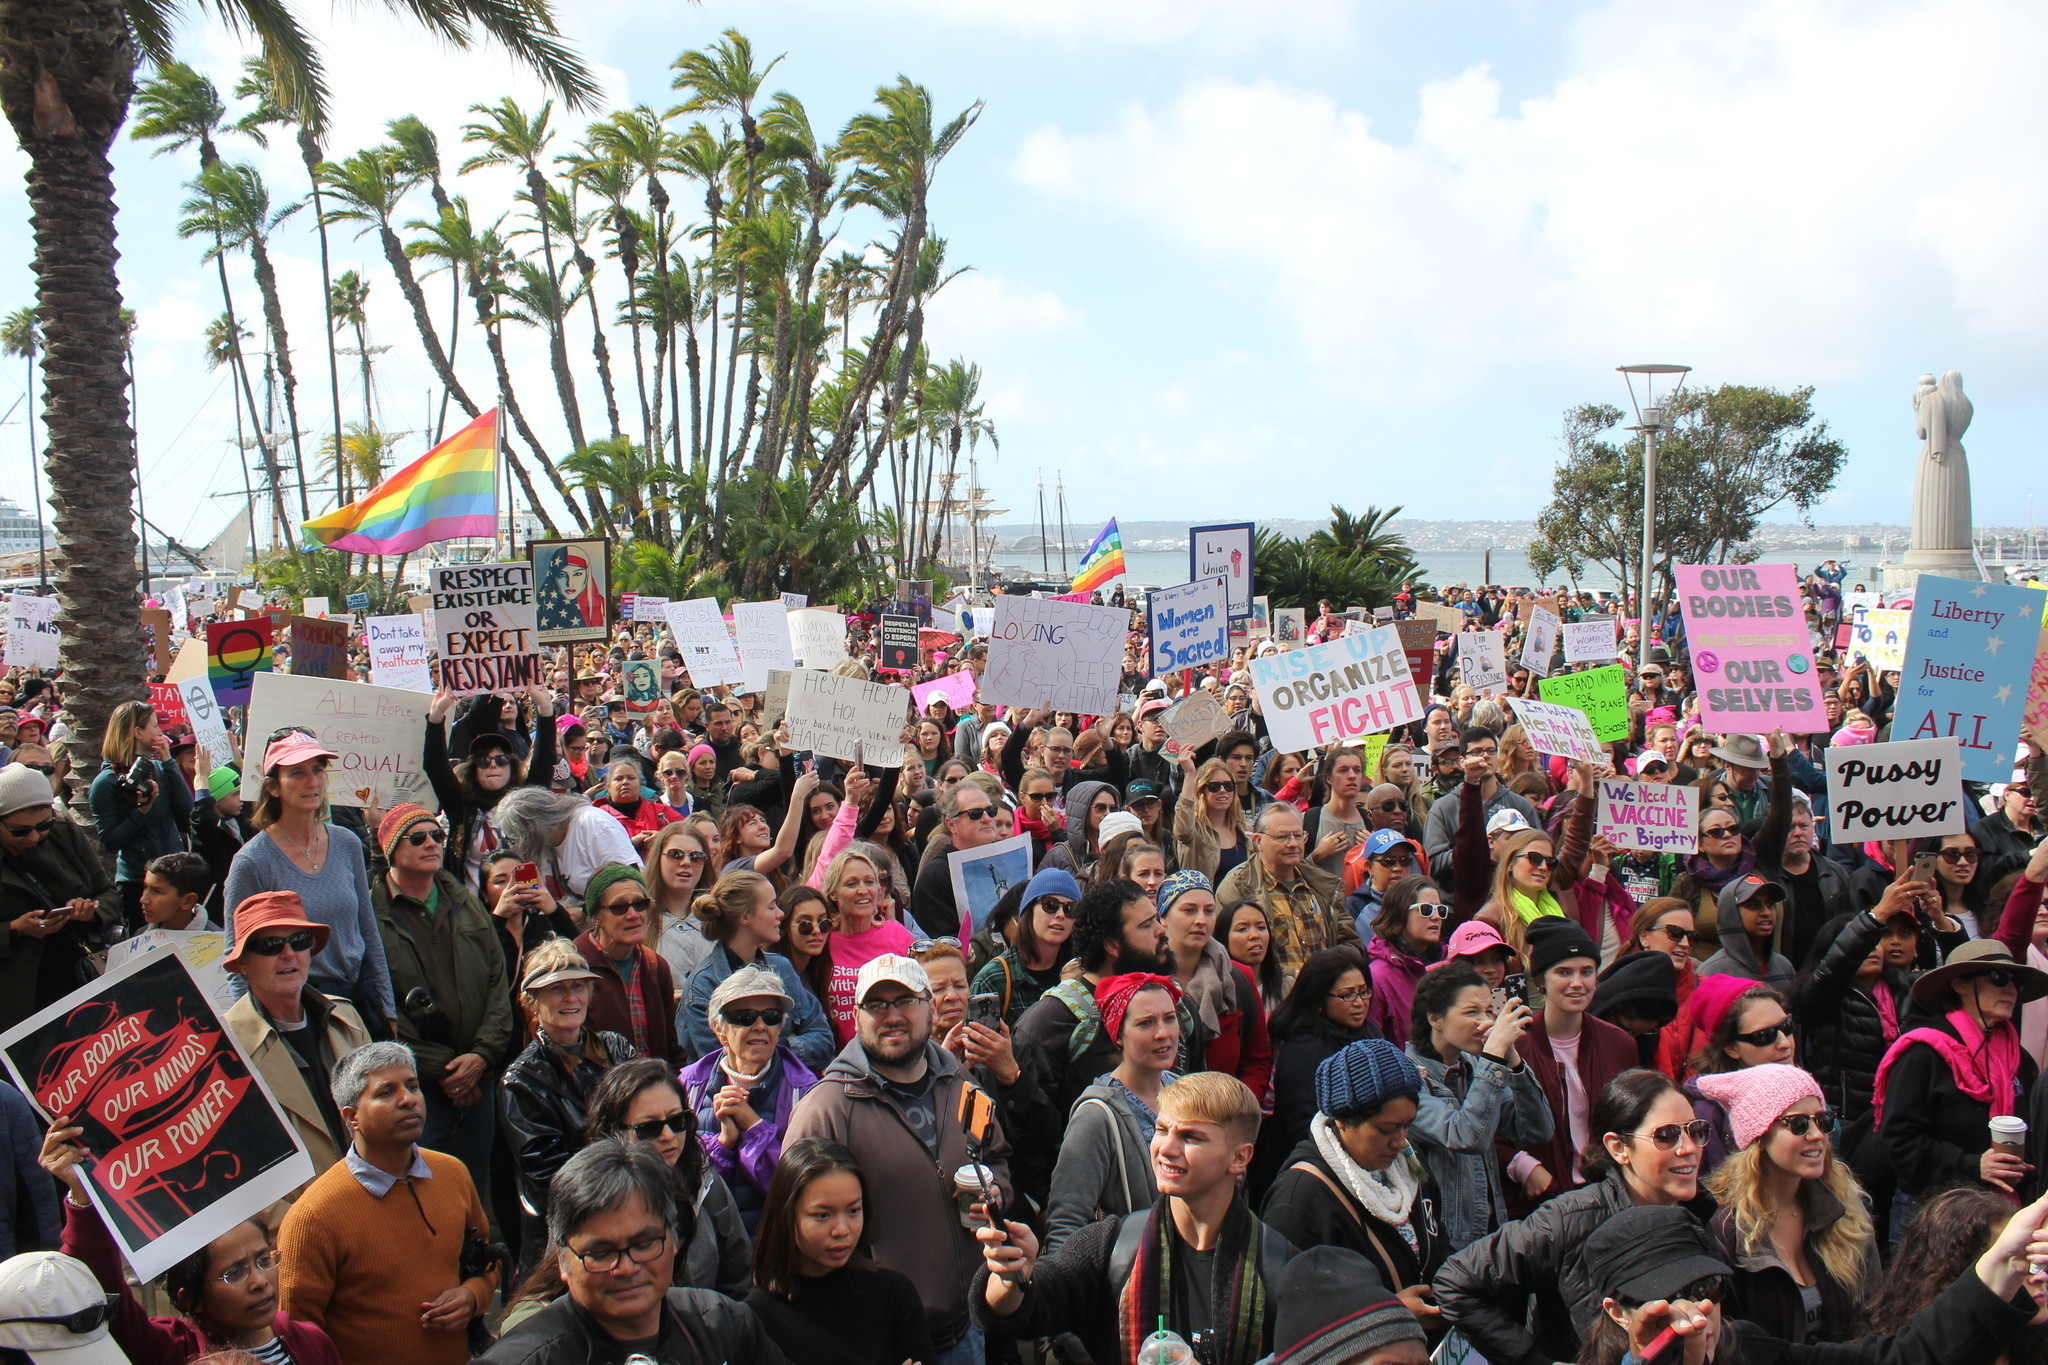 Photos: Tens of thousands turnout for Women’s March in San Diego - La Jolla Light